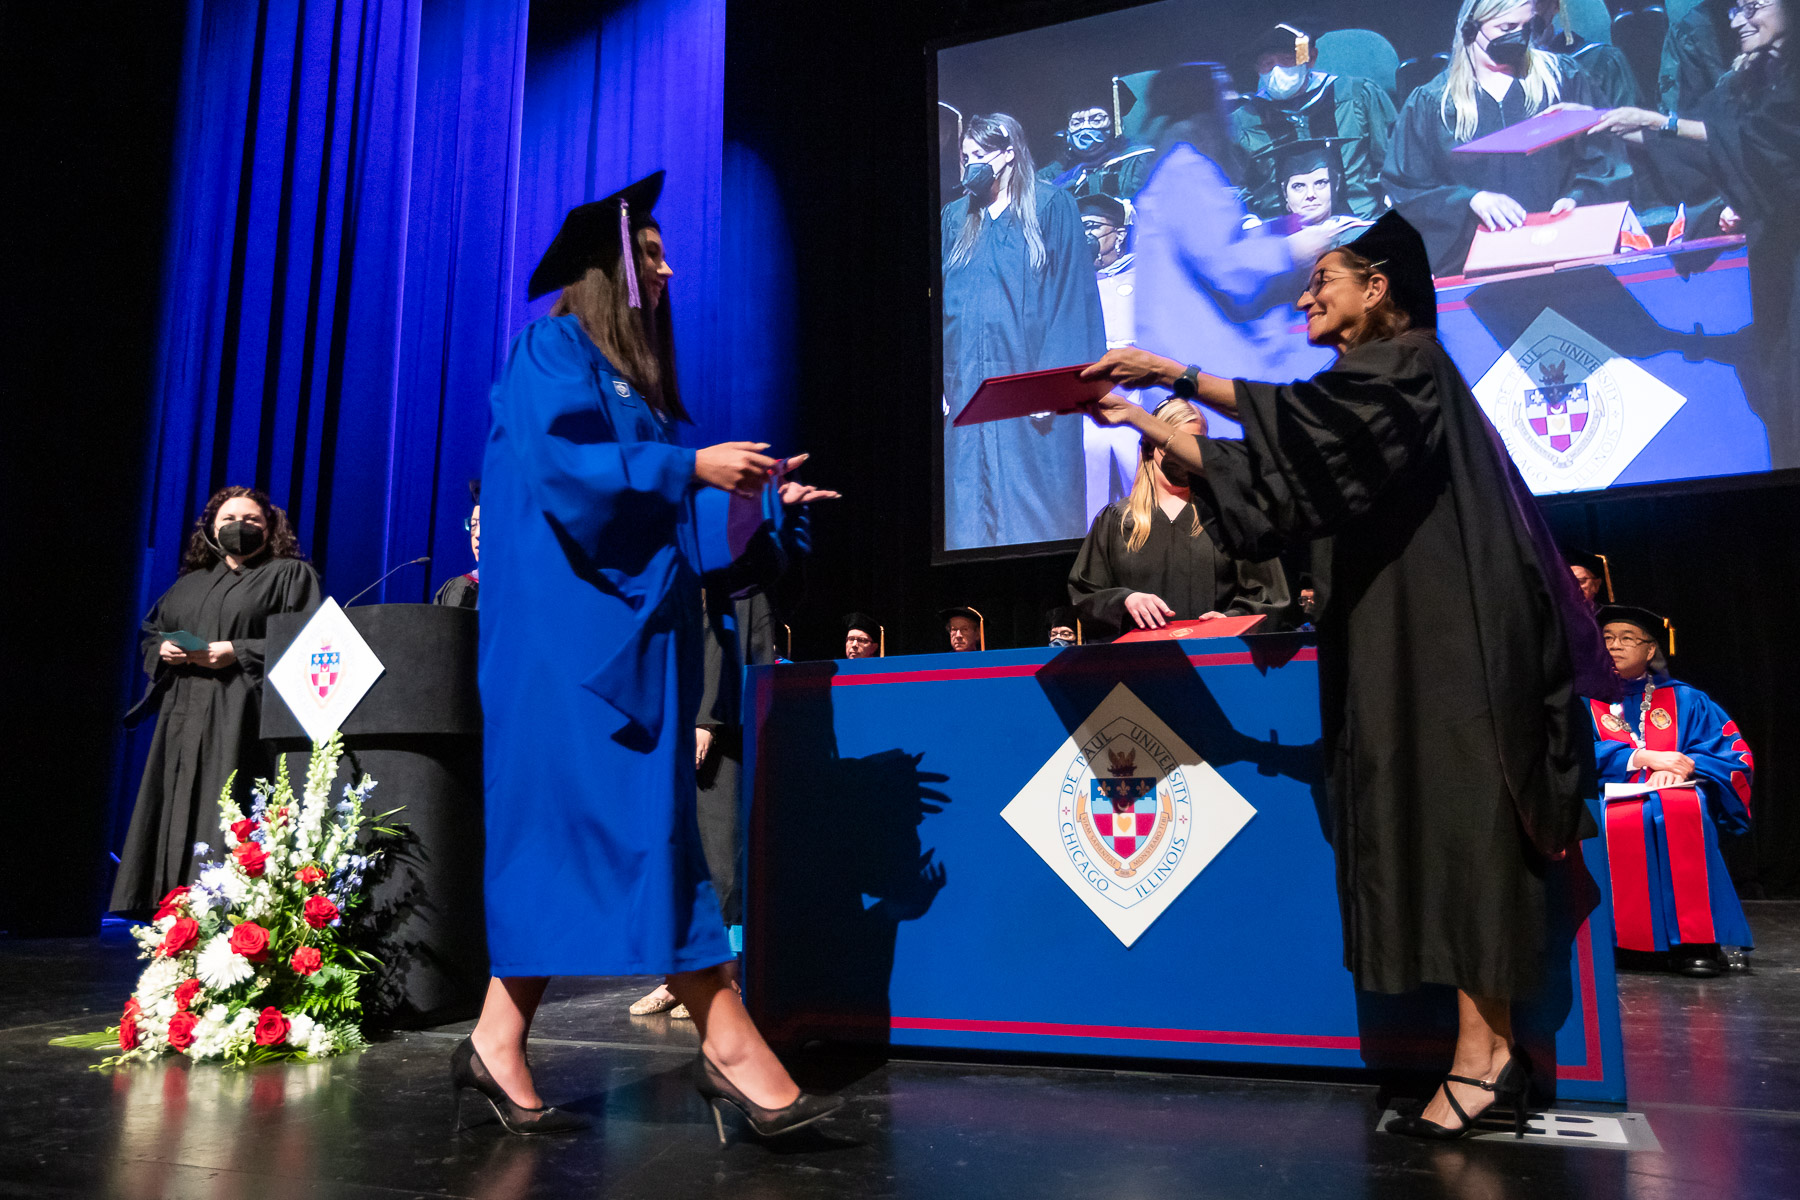 Marta Frankiv, the first graduate of 2022, and the first student to receive a degree in person since 2019, at the DePaul University College of Law commencement ceremony.